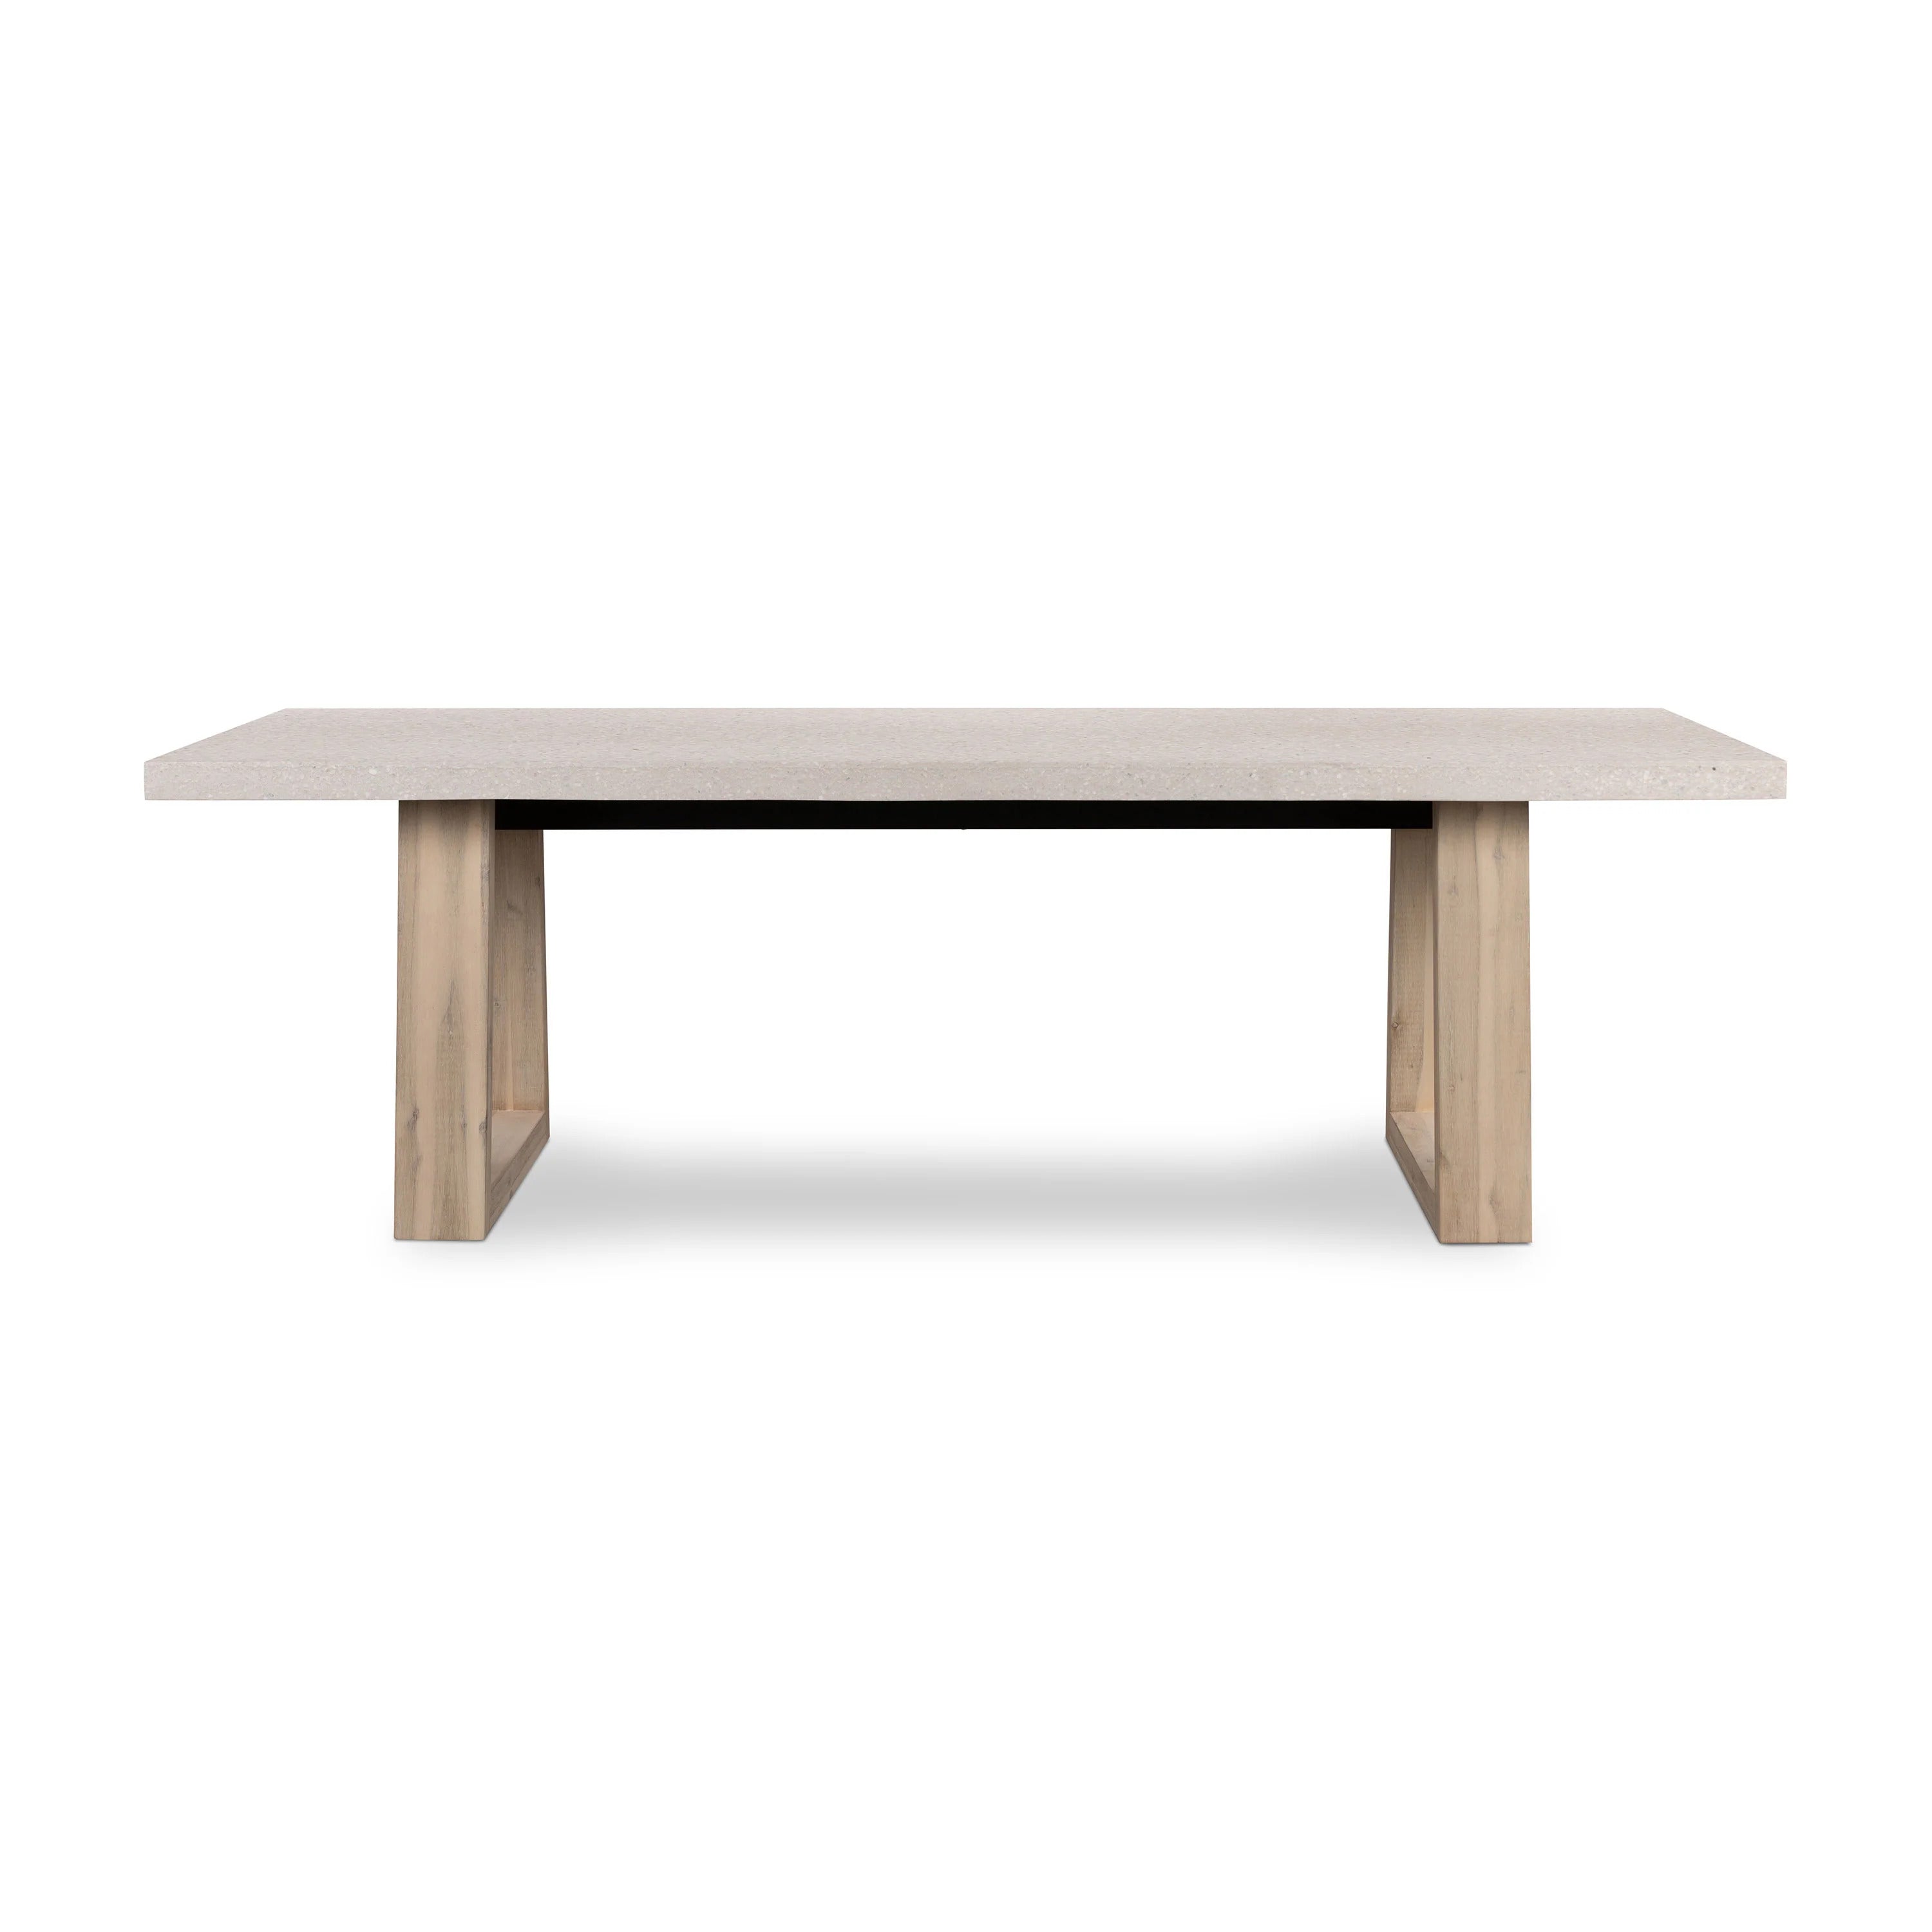 eTerrazzo Rectangular Dining Table (Ivory Coast with Wide Ivory Wash Legs).